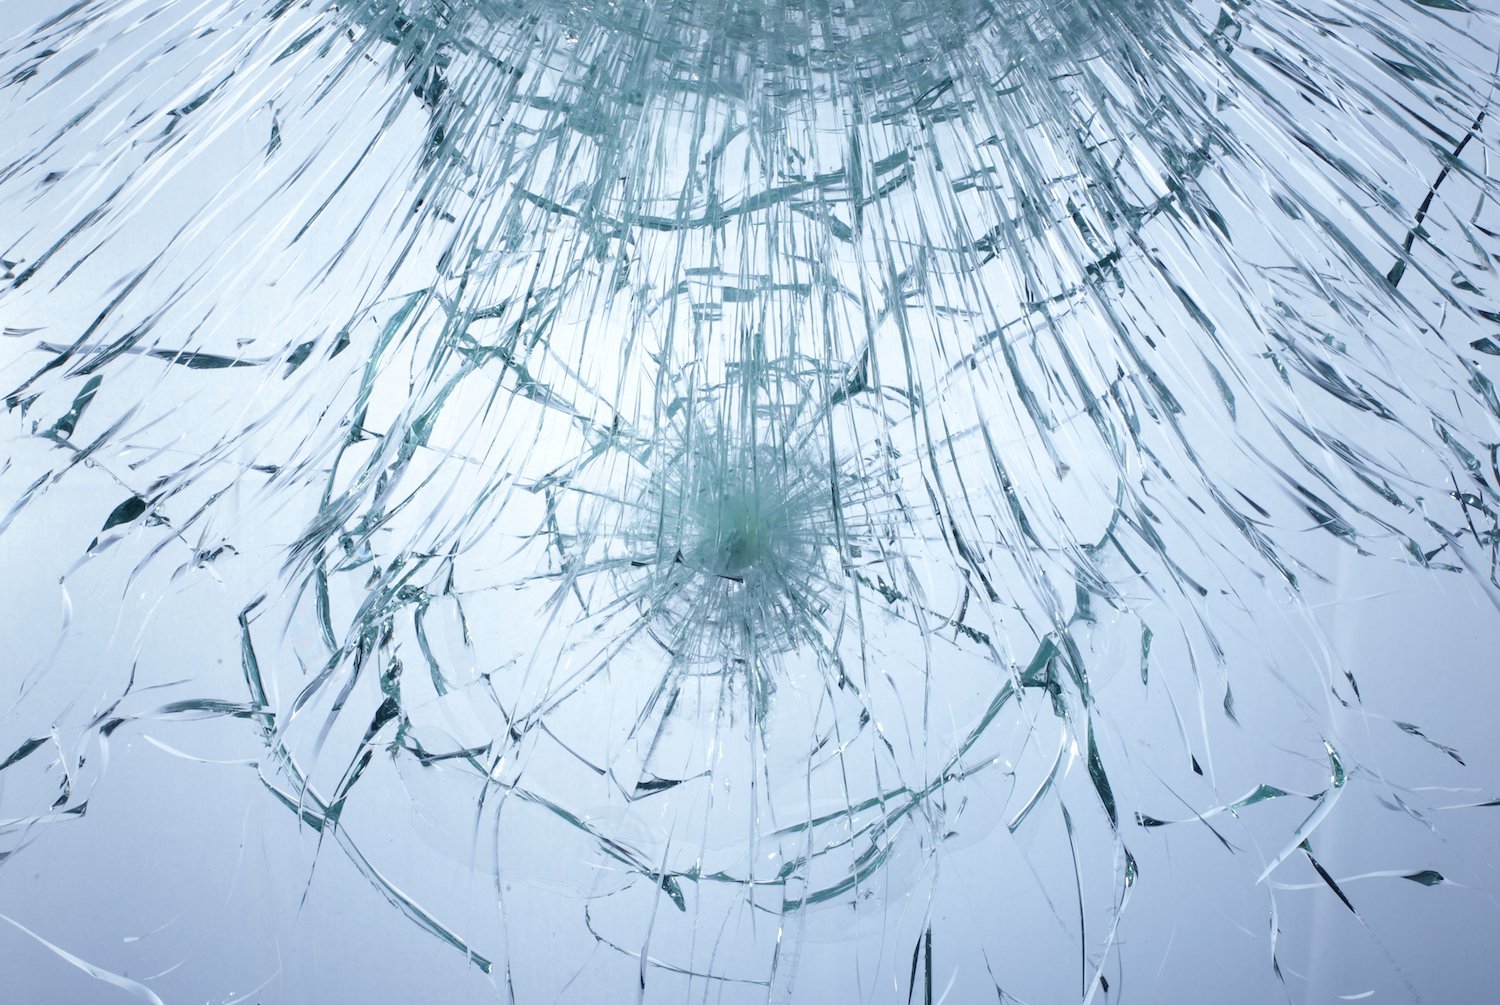 https://www.coindesk.com/ethereum-security-lead-hard-fork-required-to-release-frozen-parity-funds/